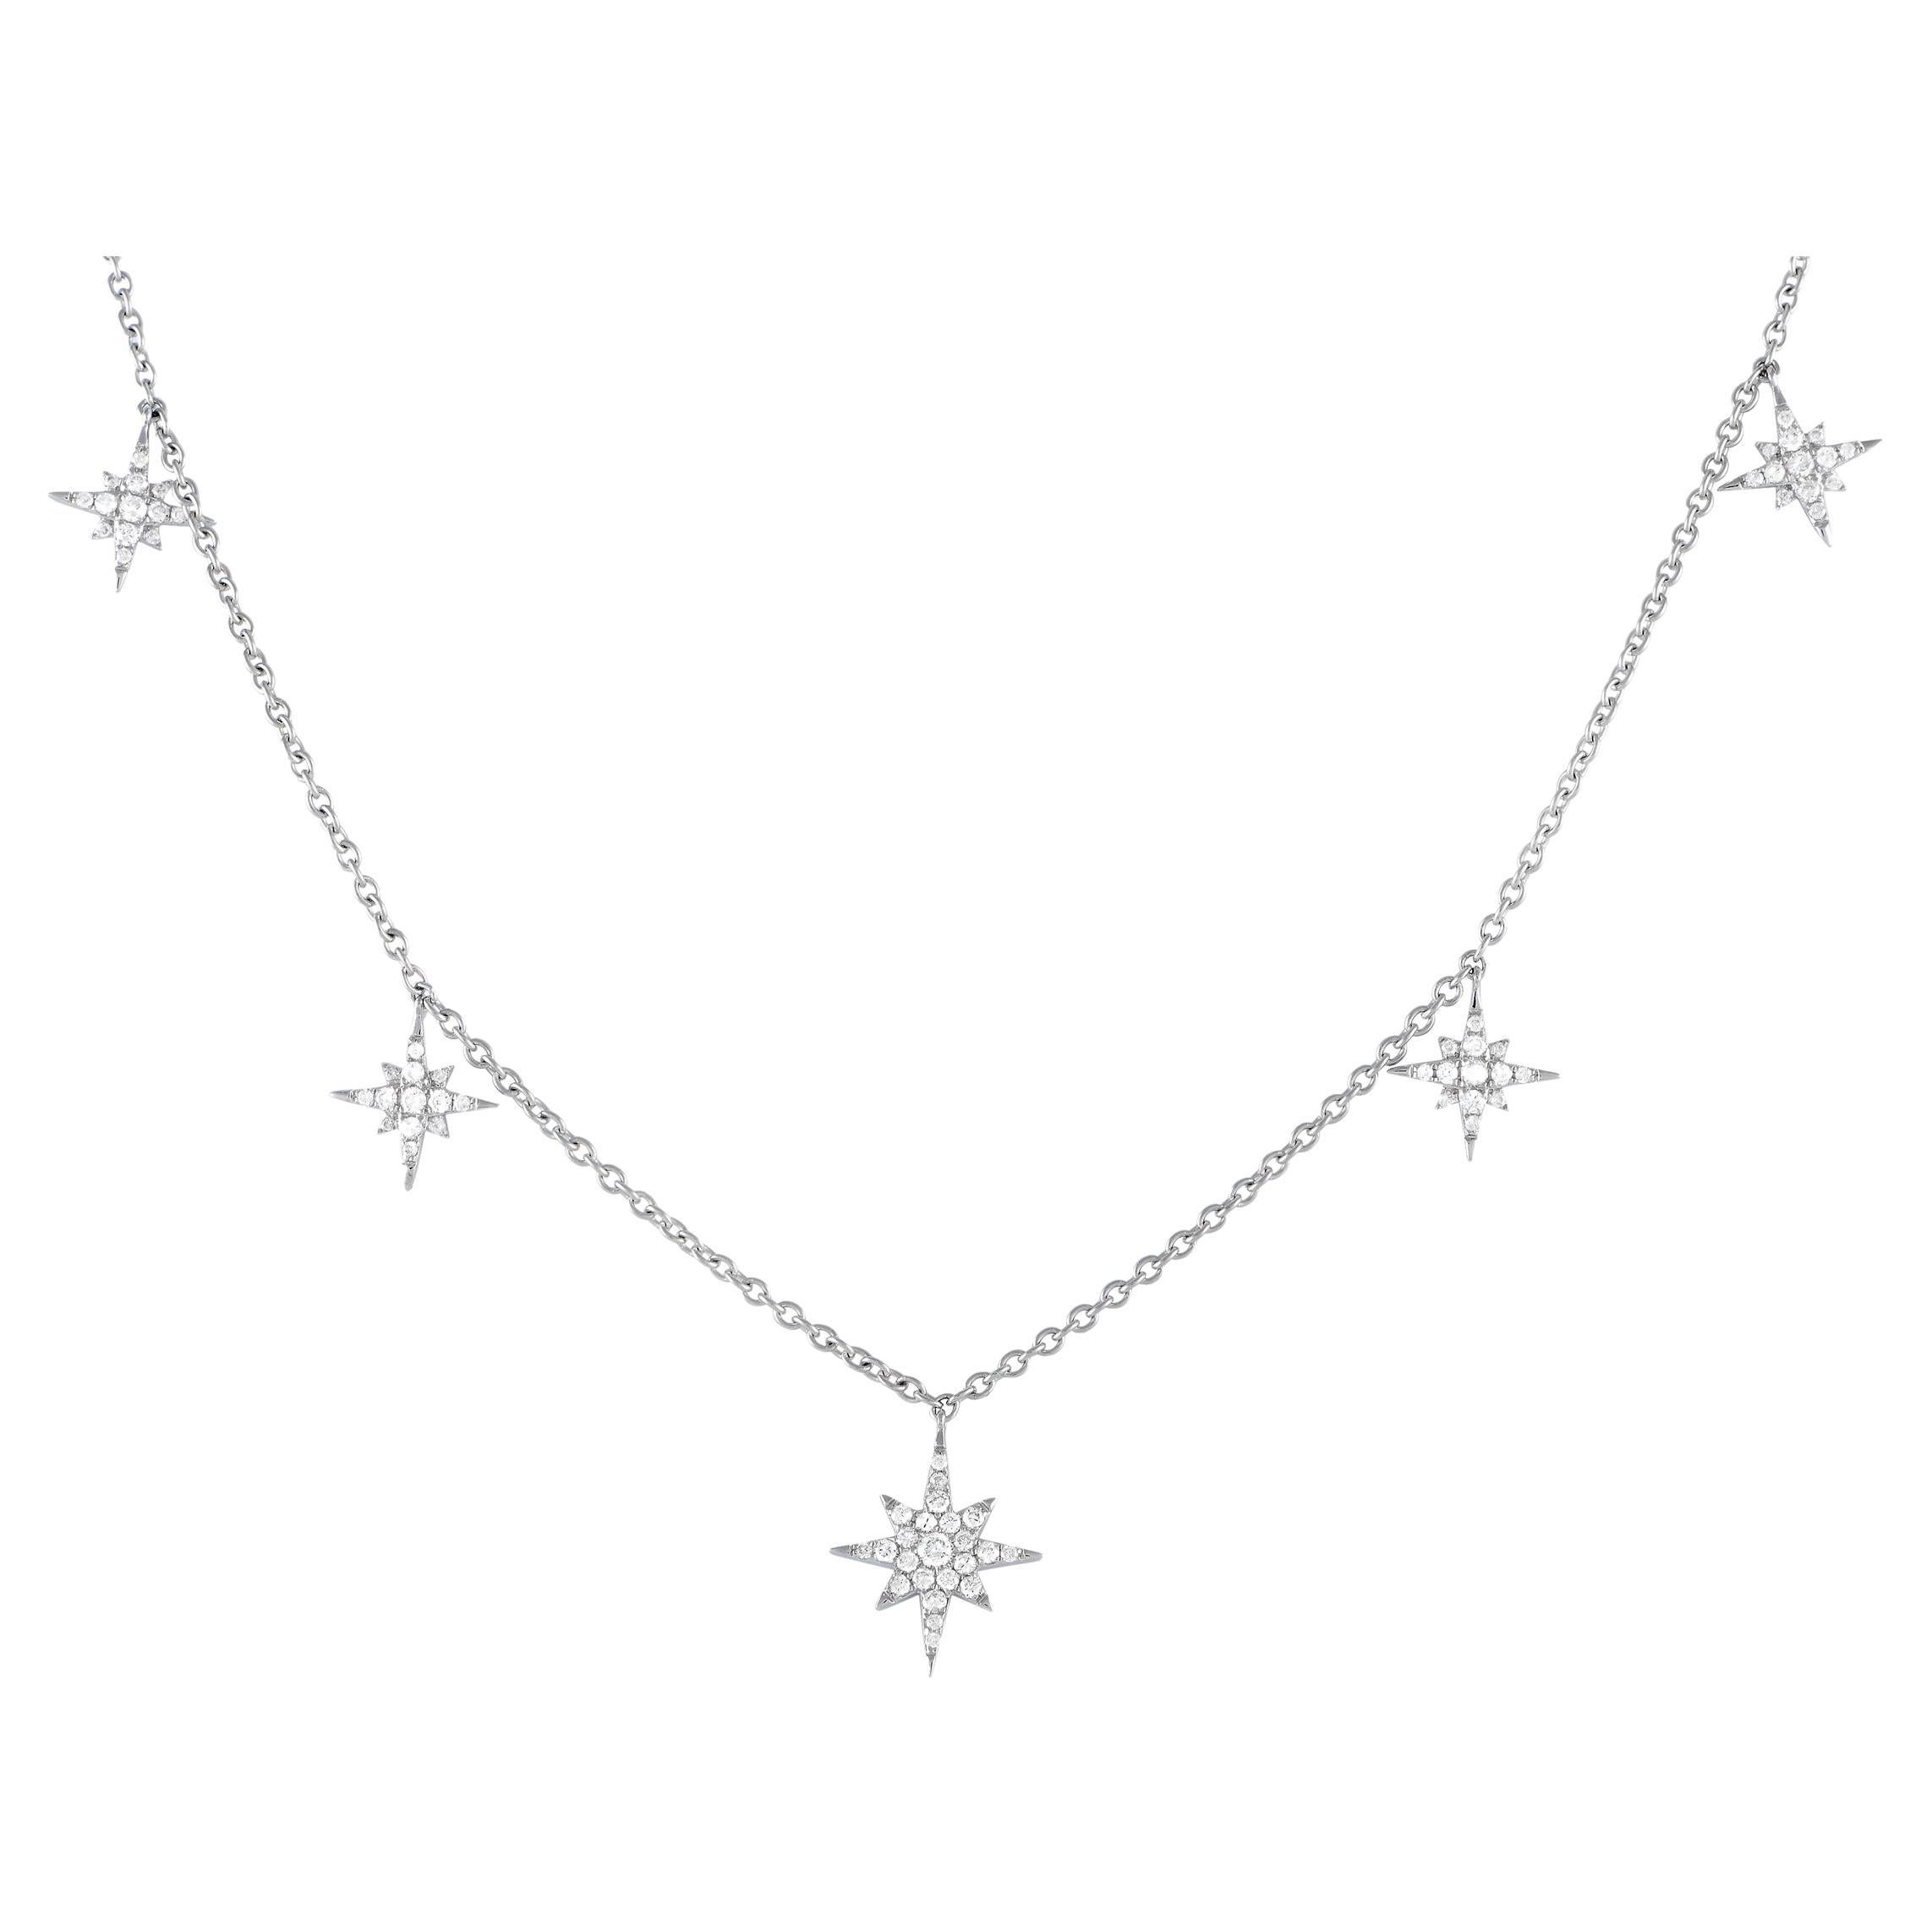 LB Exclusive 18K White Gold 0.50ct Diamond Star Station Necklace